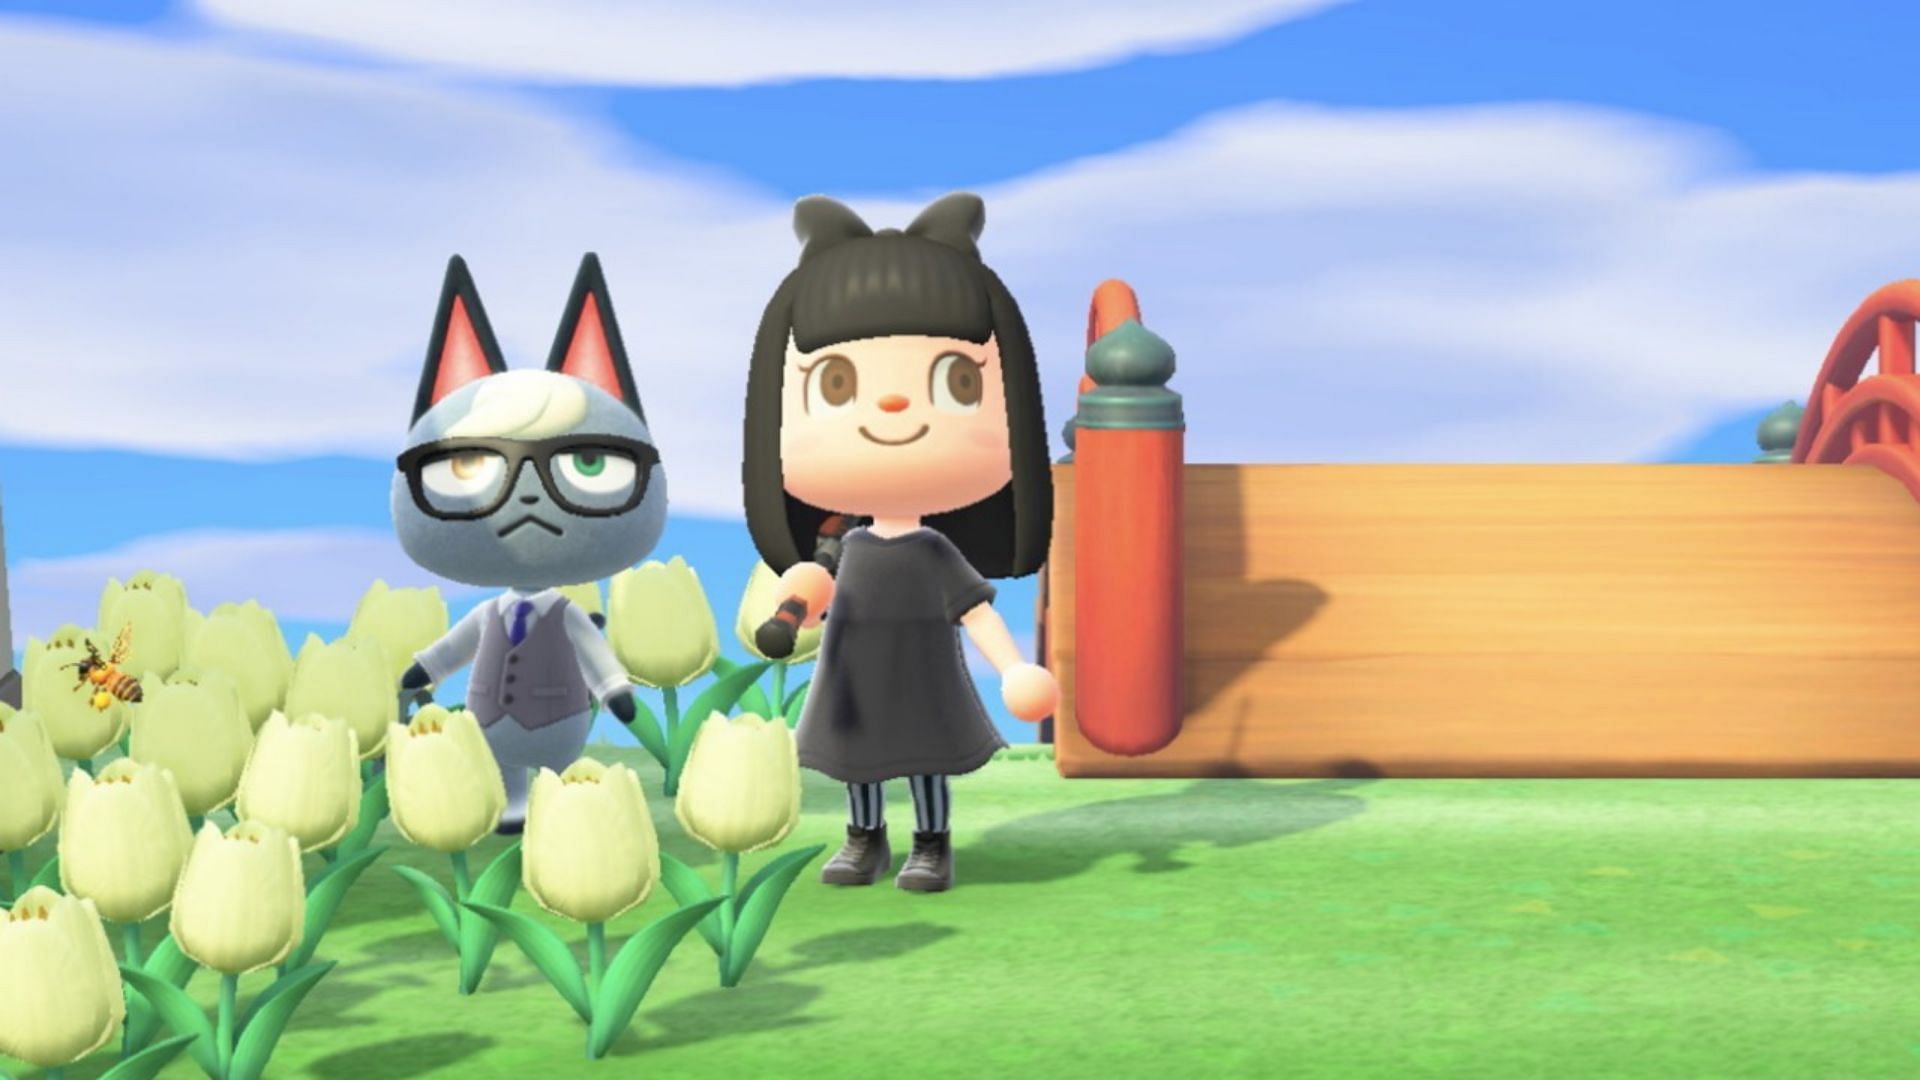 Raymond is among the most popular villagers in Animal Crossing: New Horizons (Image via Nintendo)